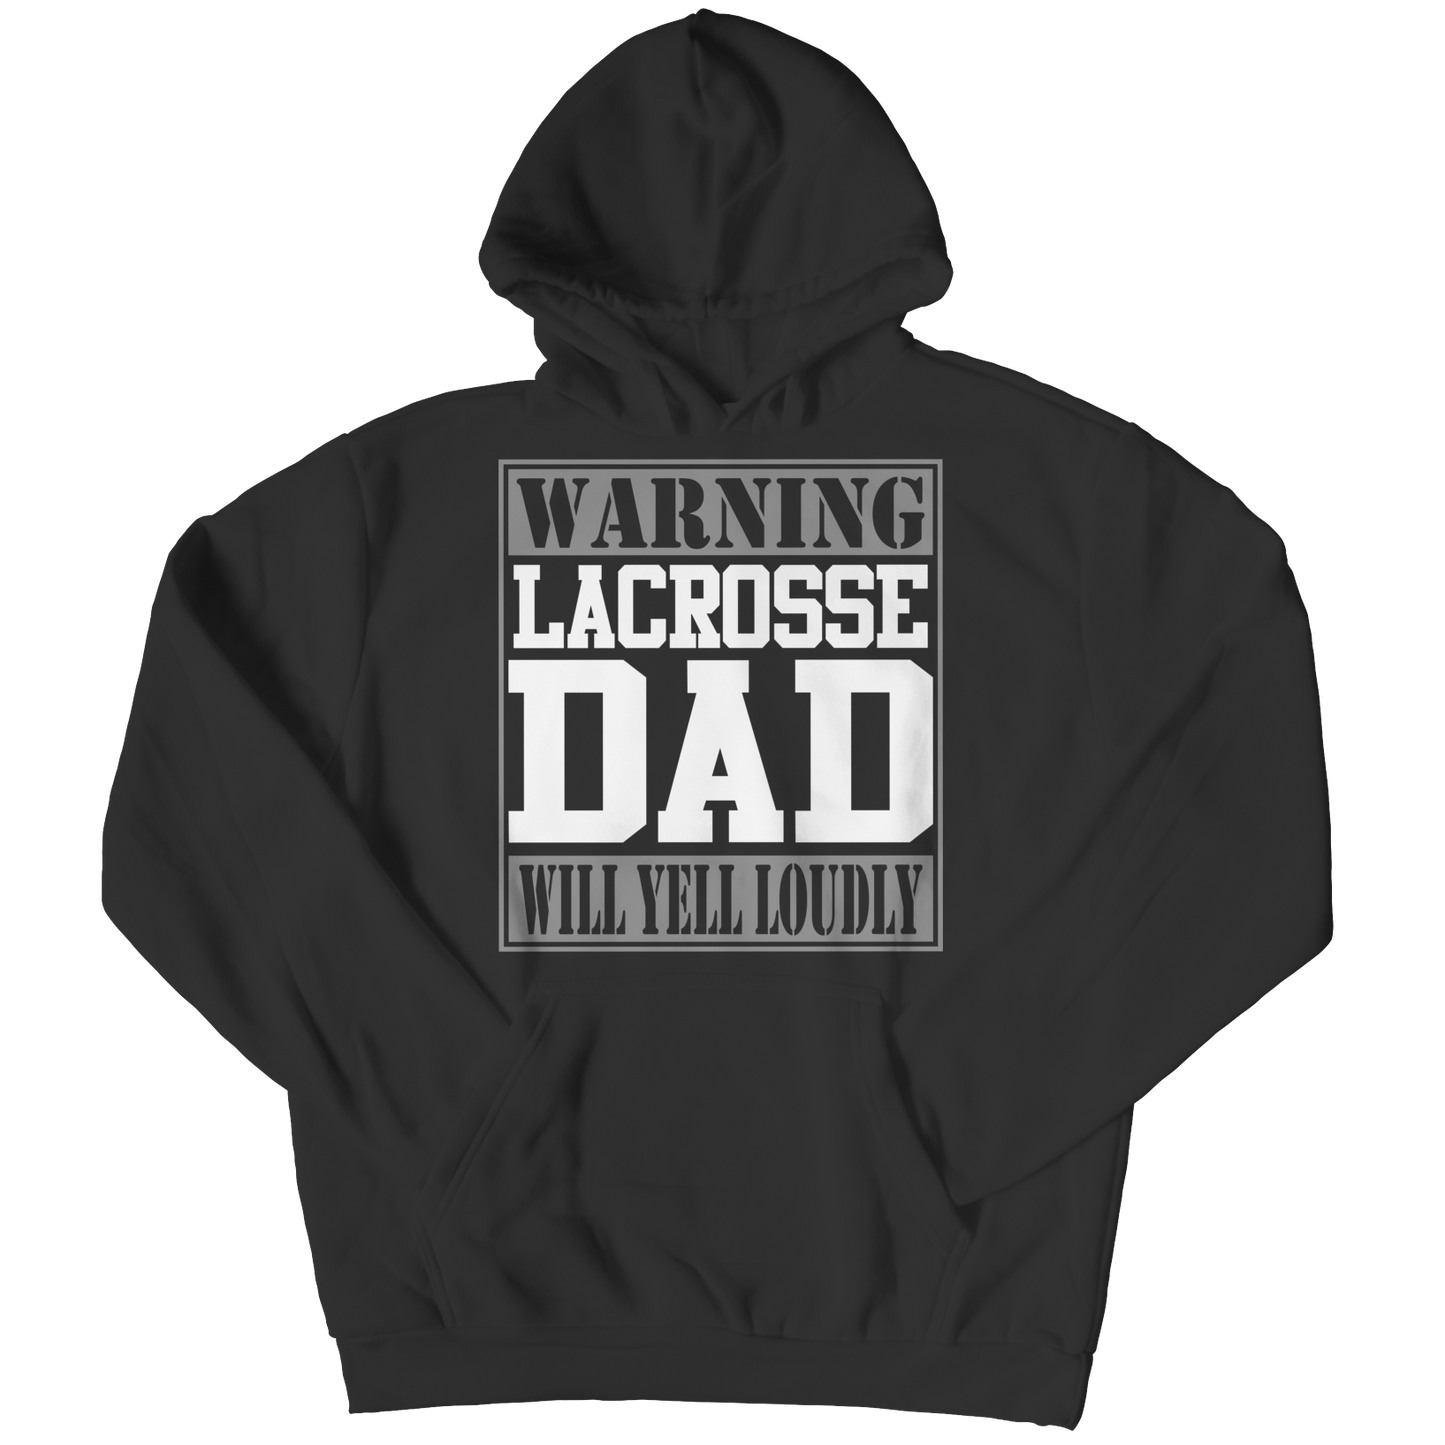 Limited Edition - Warning Lacrosse Dad will Yell Loudly Shirt